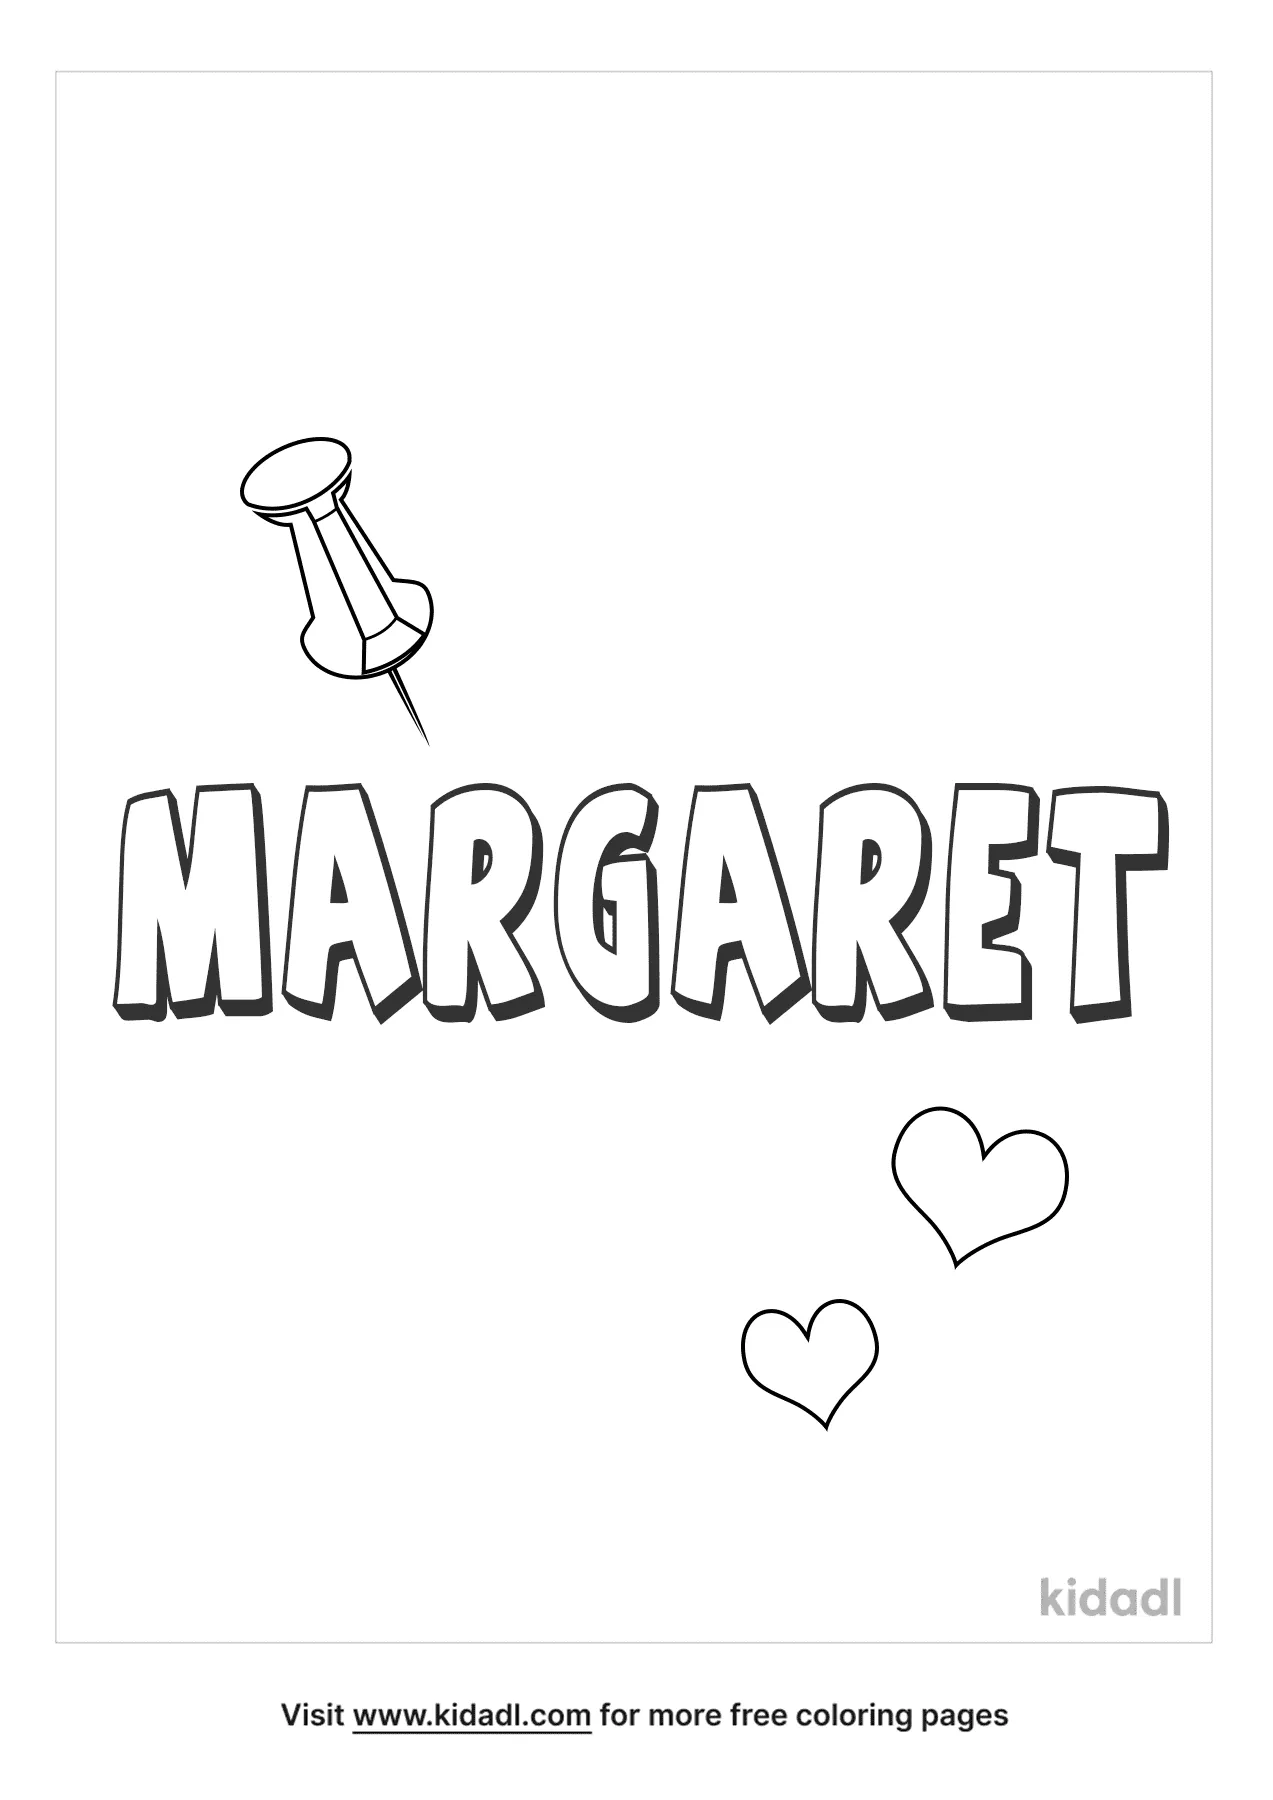 Name Margaret Coloring Page